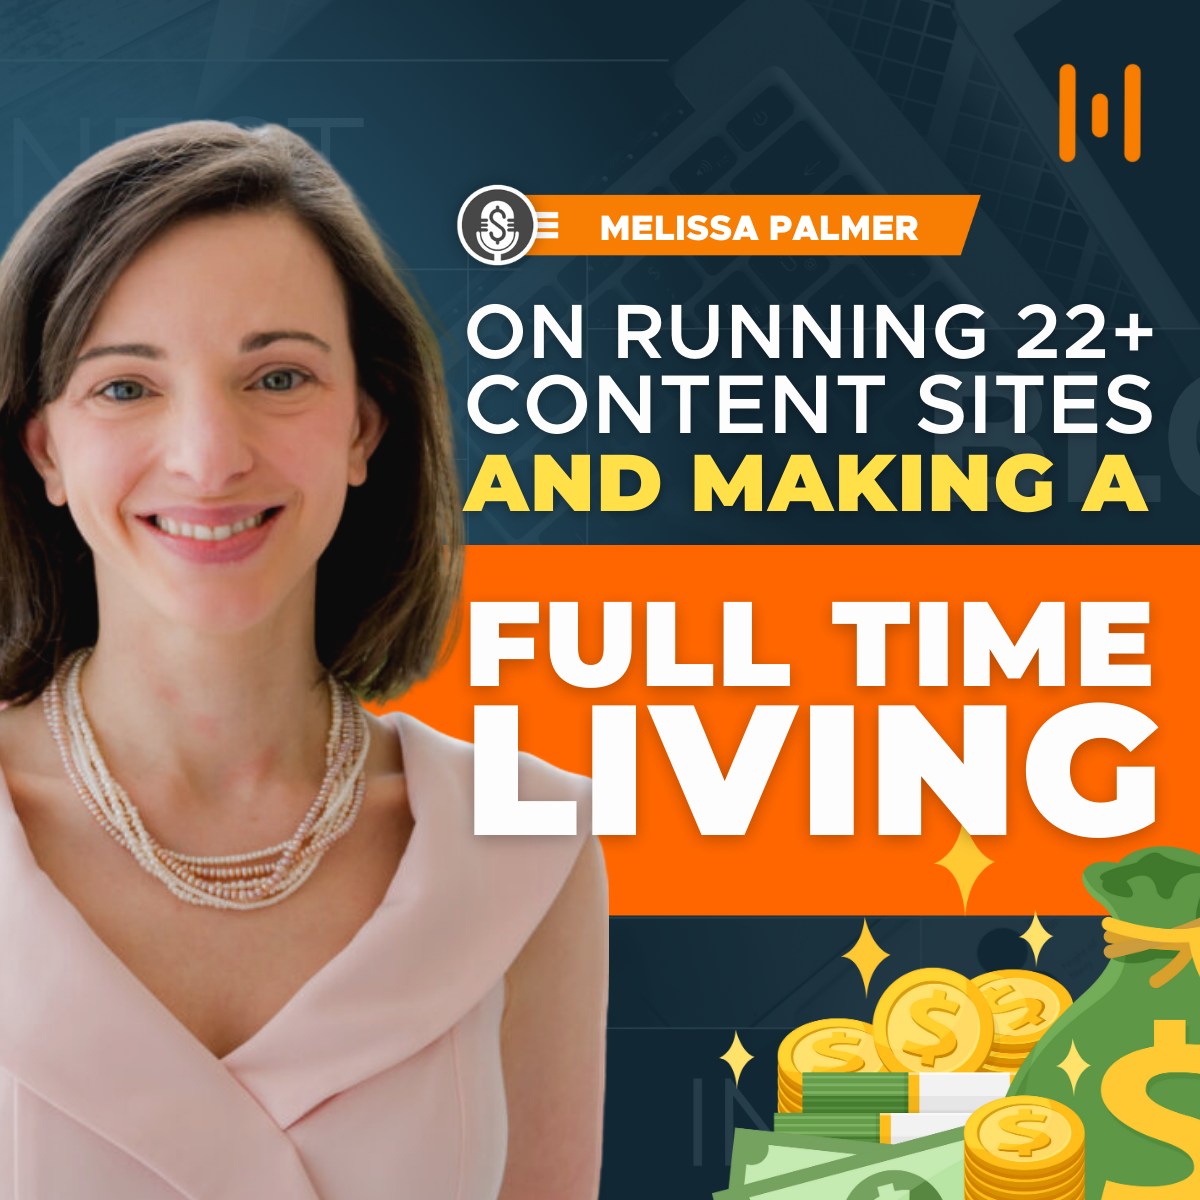 Melissa Palmer on Running 22+ Content Sites and Making a Full-Time Living